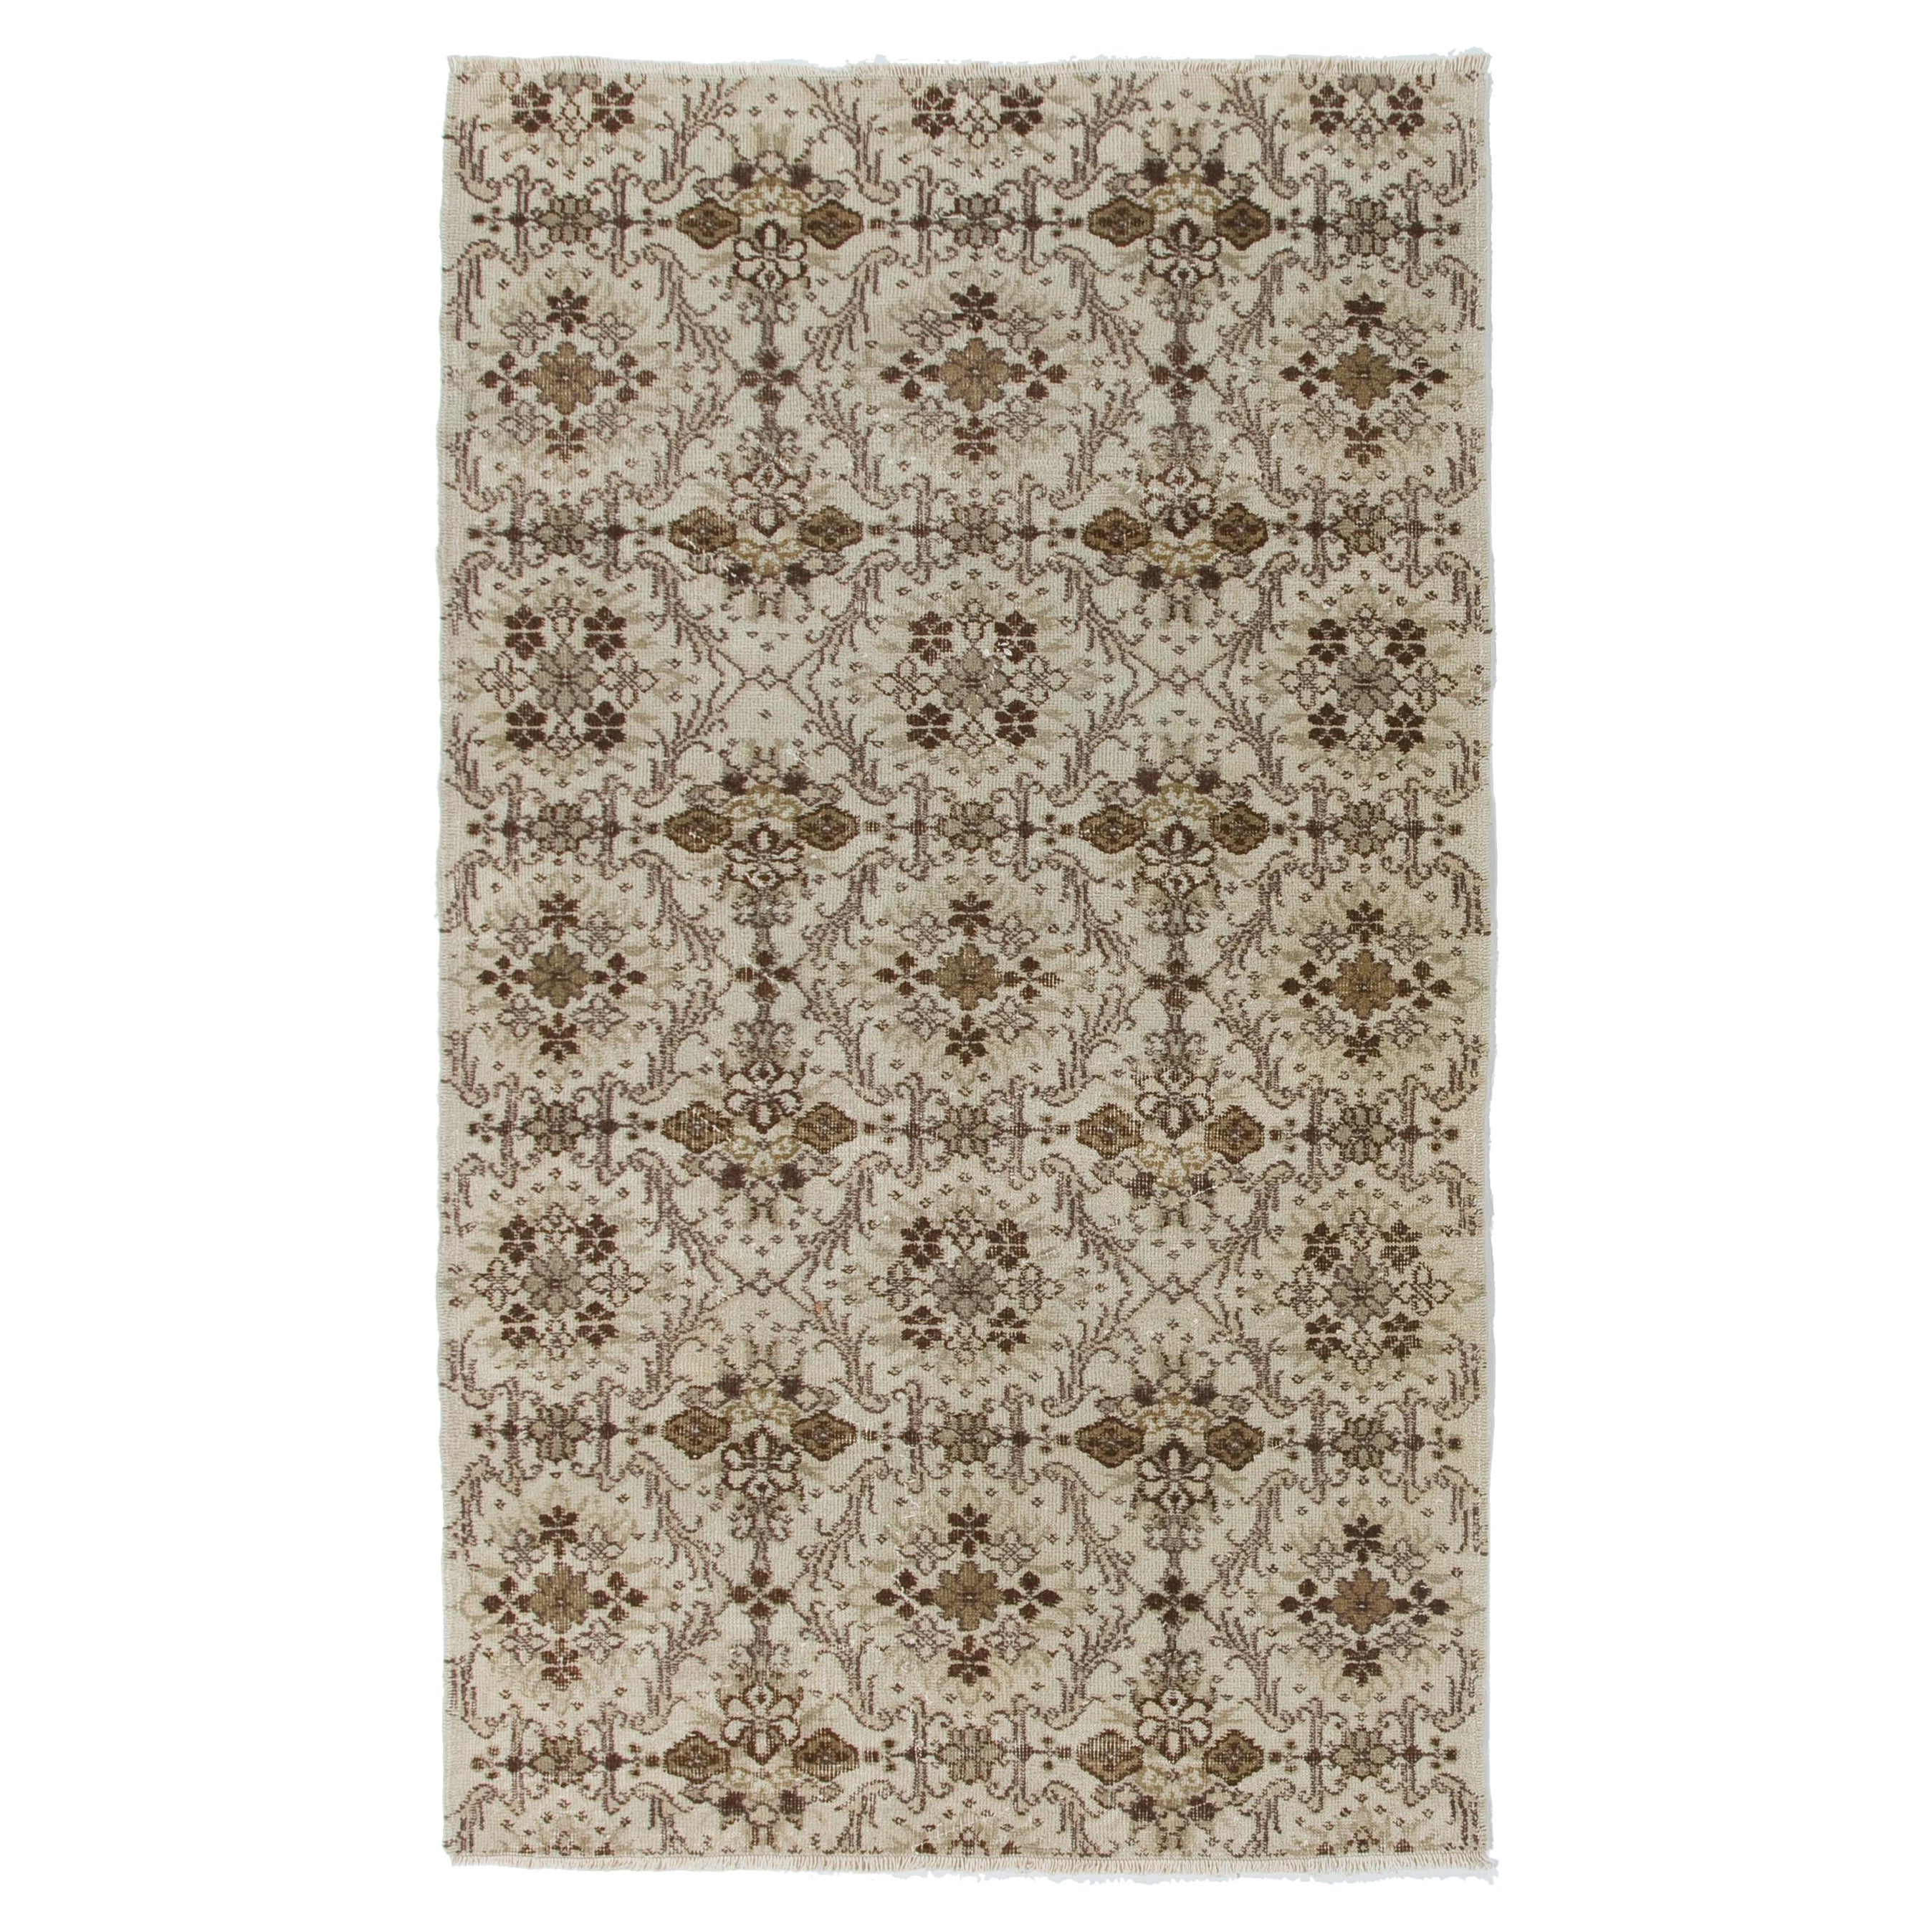 4x7 Ft MidCentury Turkish Deco Accent Rug. Wool Handmade Carpet, Floor Covering For Sale